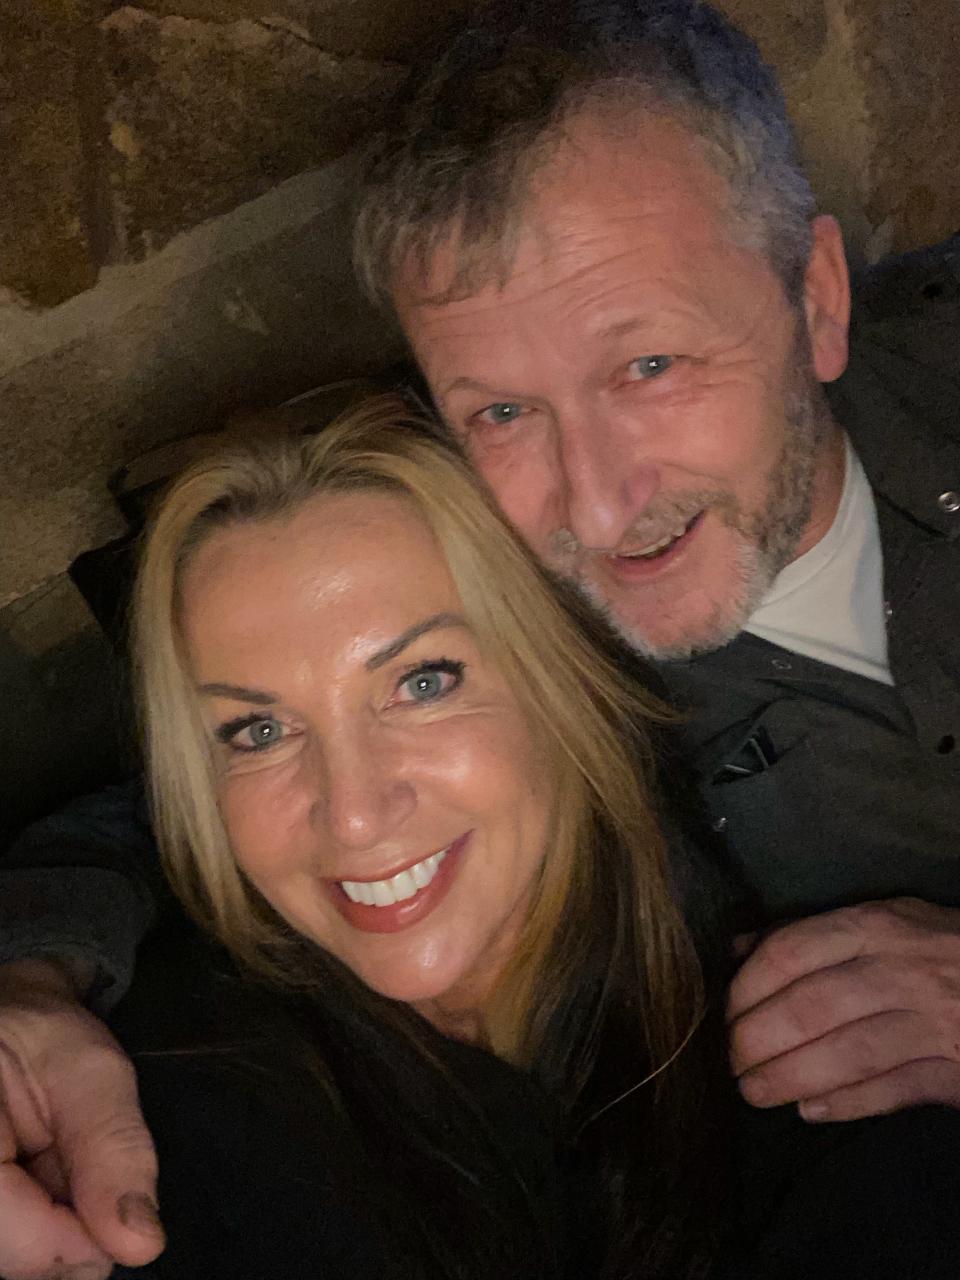 Tina Bird (pictured with her ex-husband Paul) says fostering is emotionally rewarding, but 'not an easy job'. (Supplied)